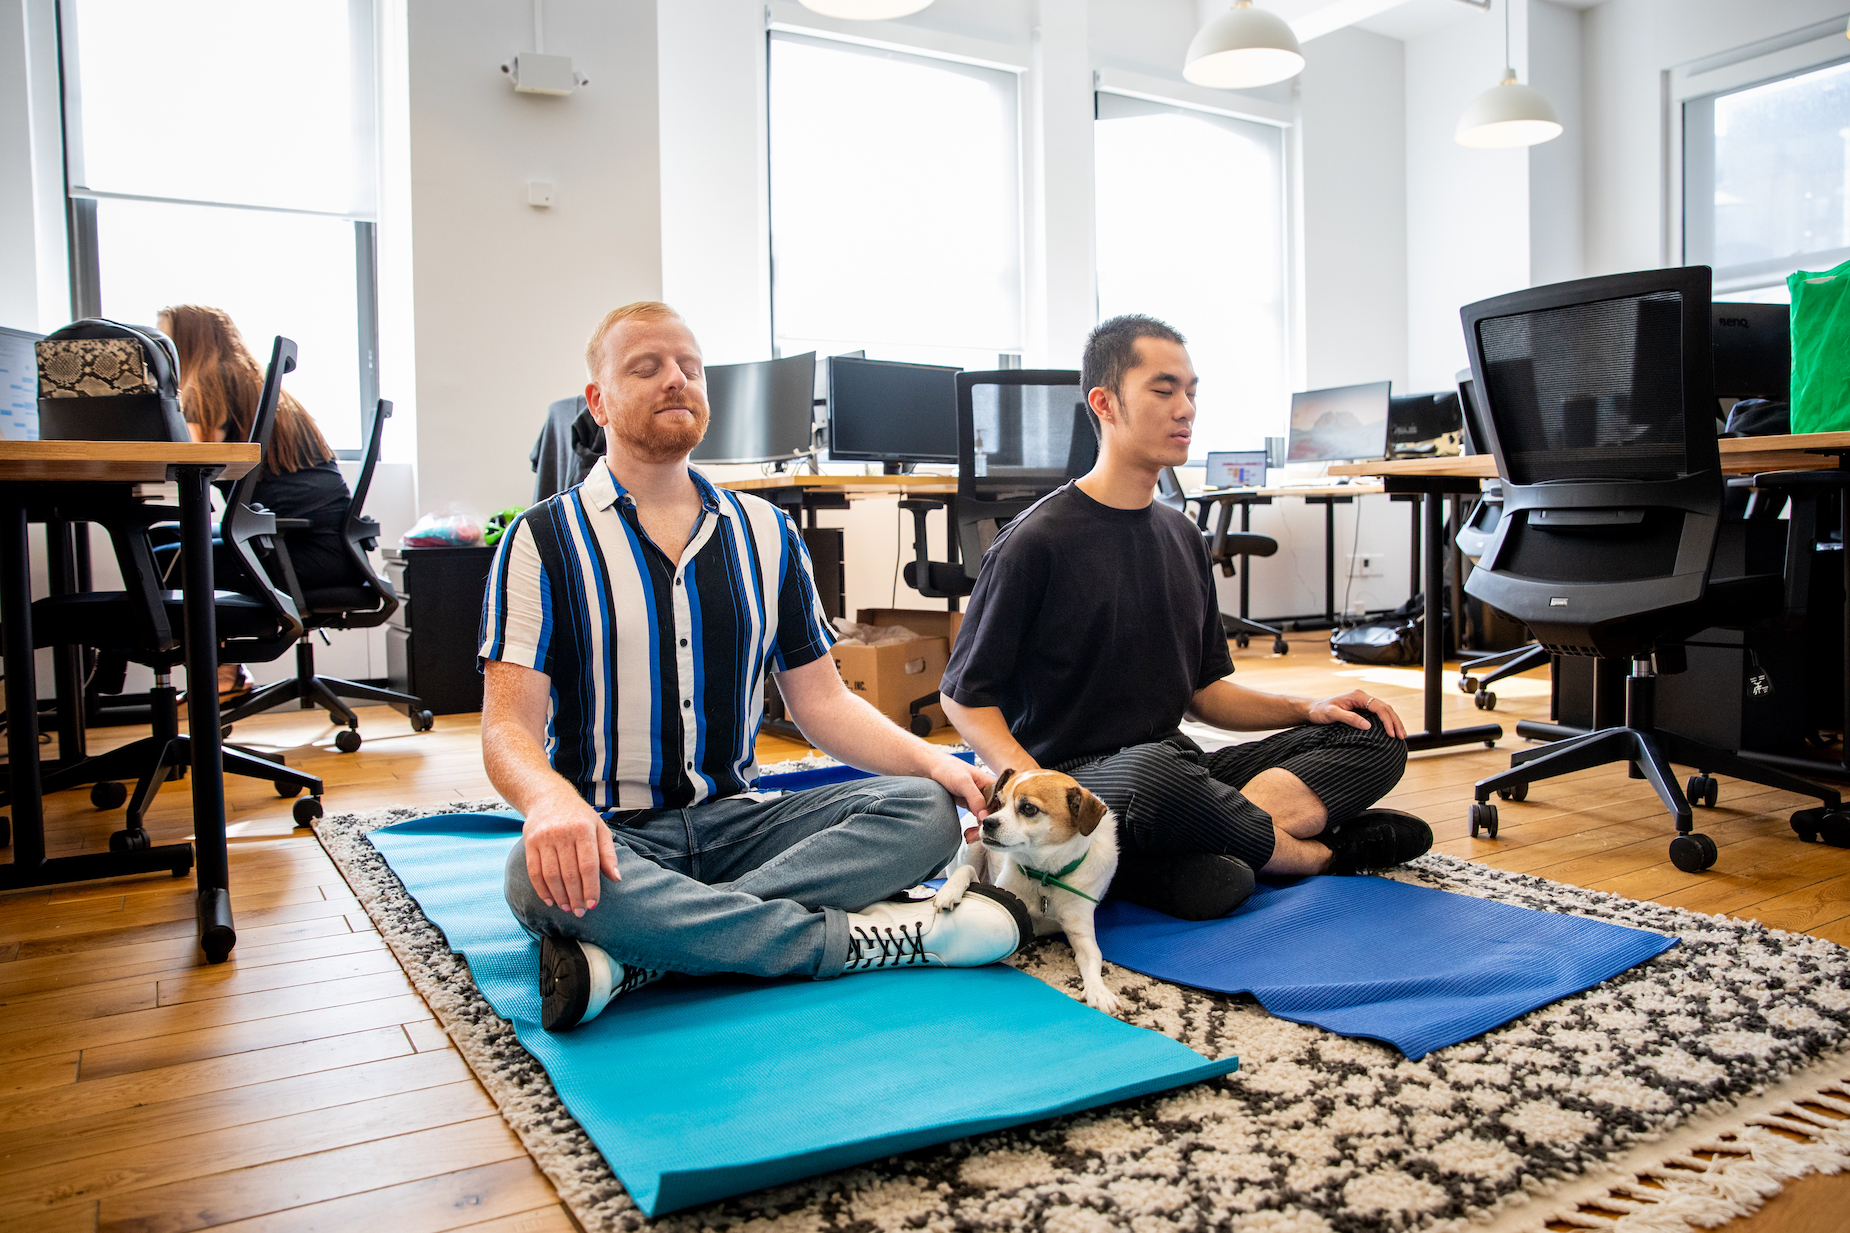 Ross Greenberg and another employee take a break to do yoga in the office while a dog lays in between them.